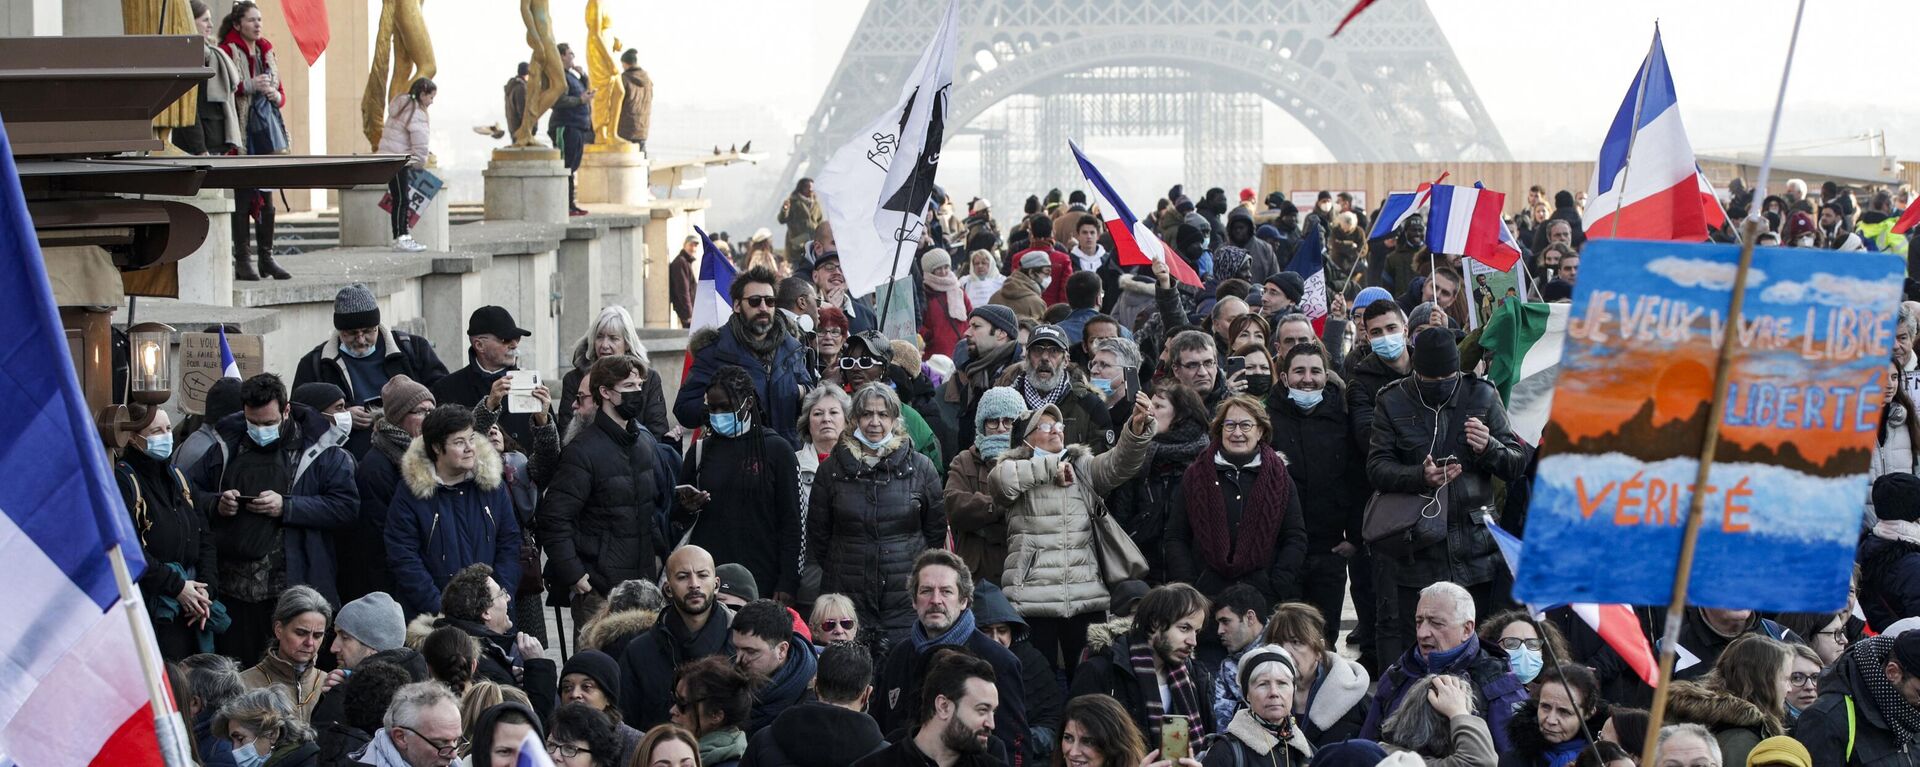 Protesters hold placards and French flgas during a demonstration against the health pass and Covid-19 vaccines, on Trocadero plaza in Paris, on January 15 2022.  - Sputnik International, 1920, 29.12.2022